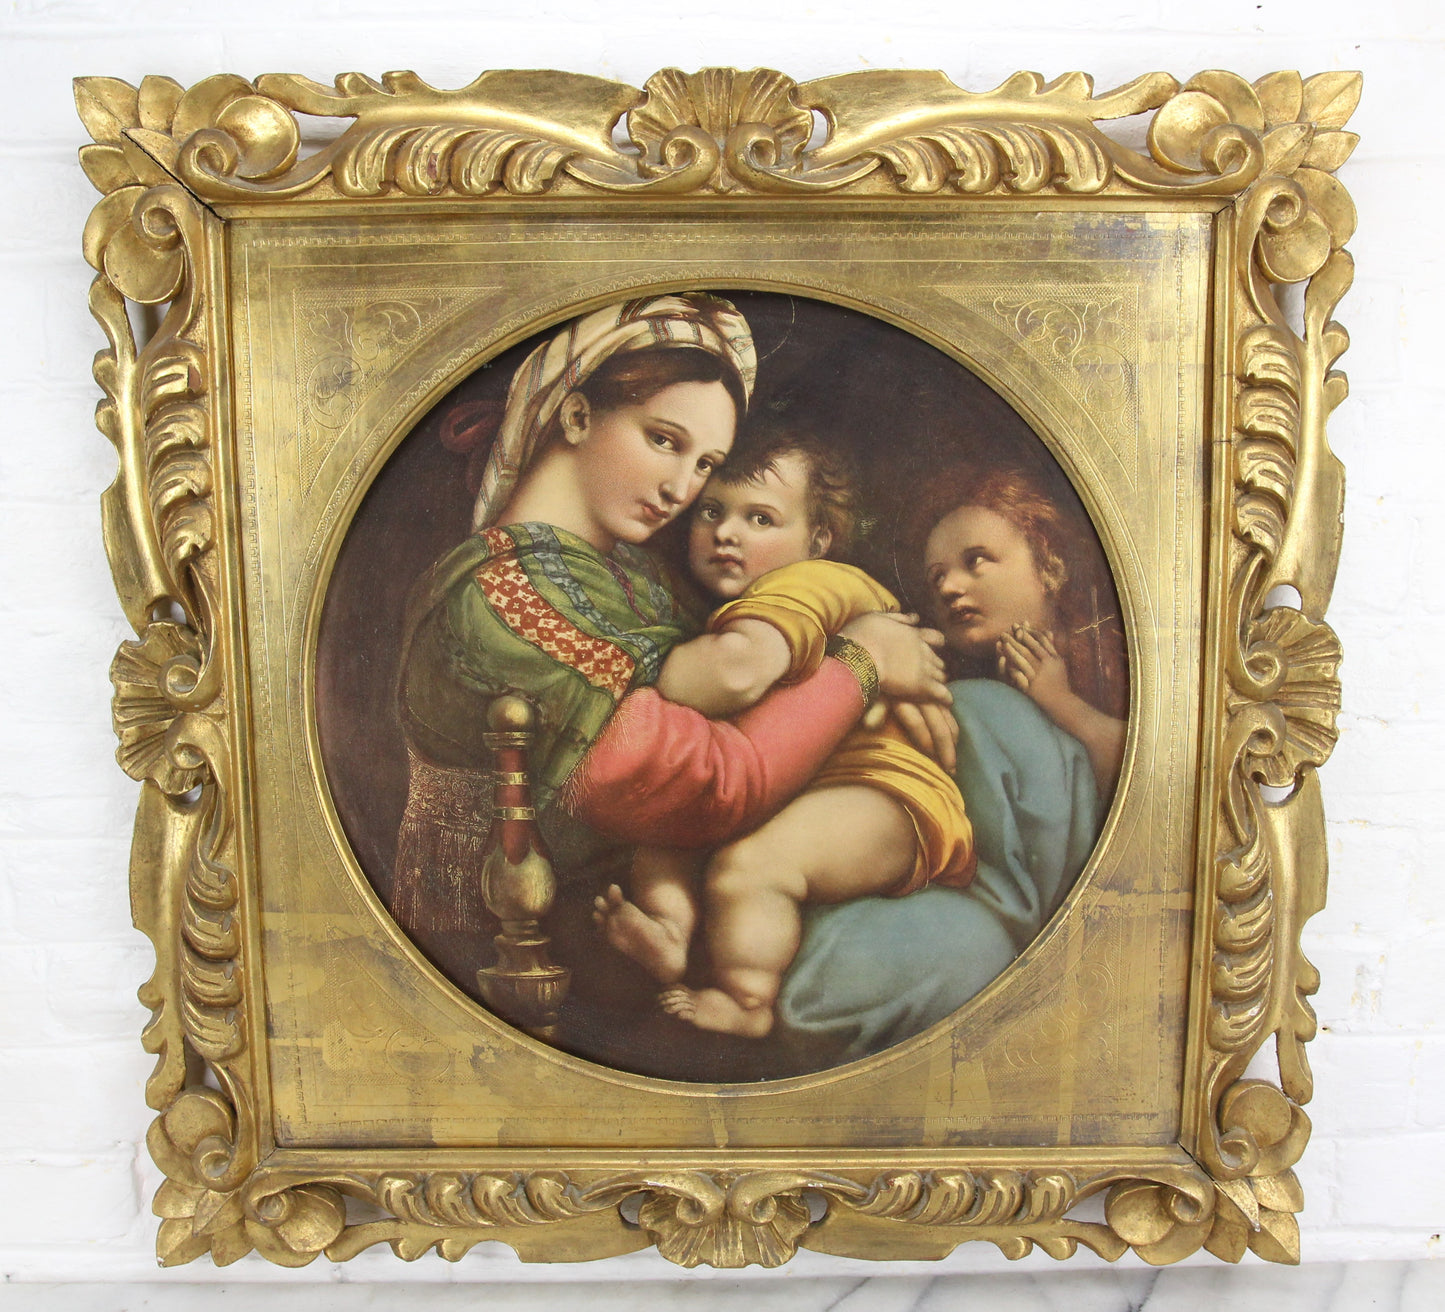 Religious Icon Print of Mother and Child on Board in Gold Frame - 27 x 26.5"